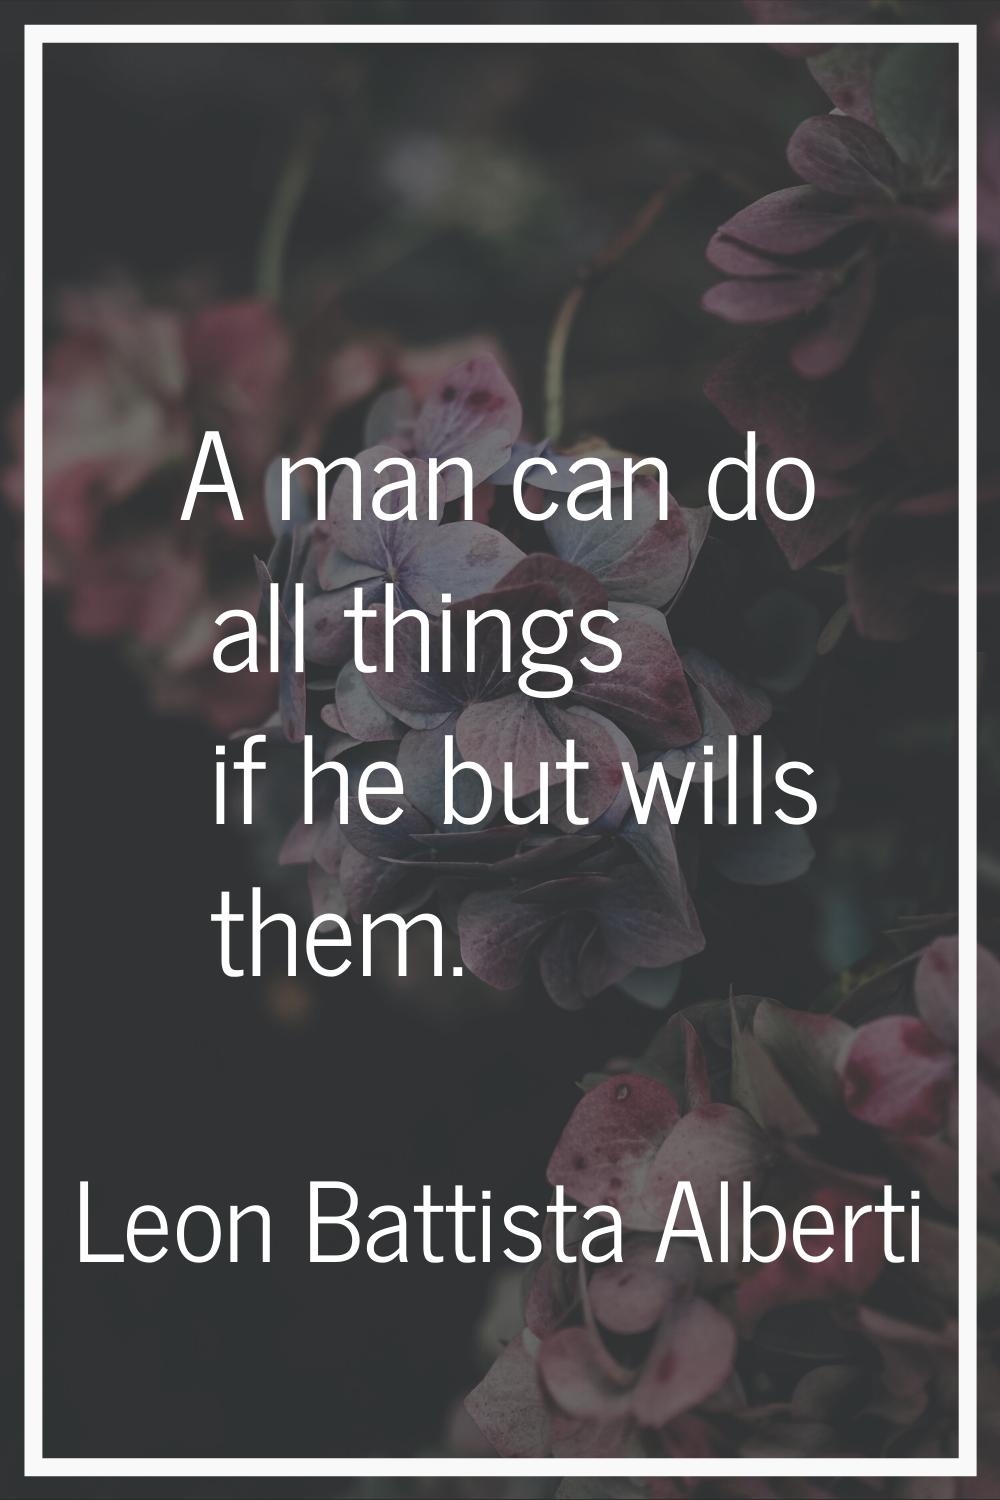 A man can do all things if he but wills them.